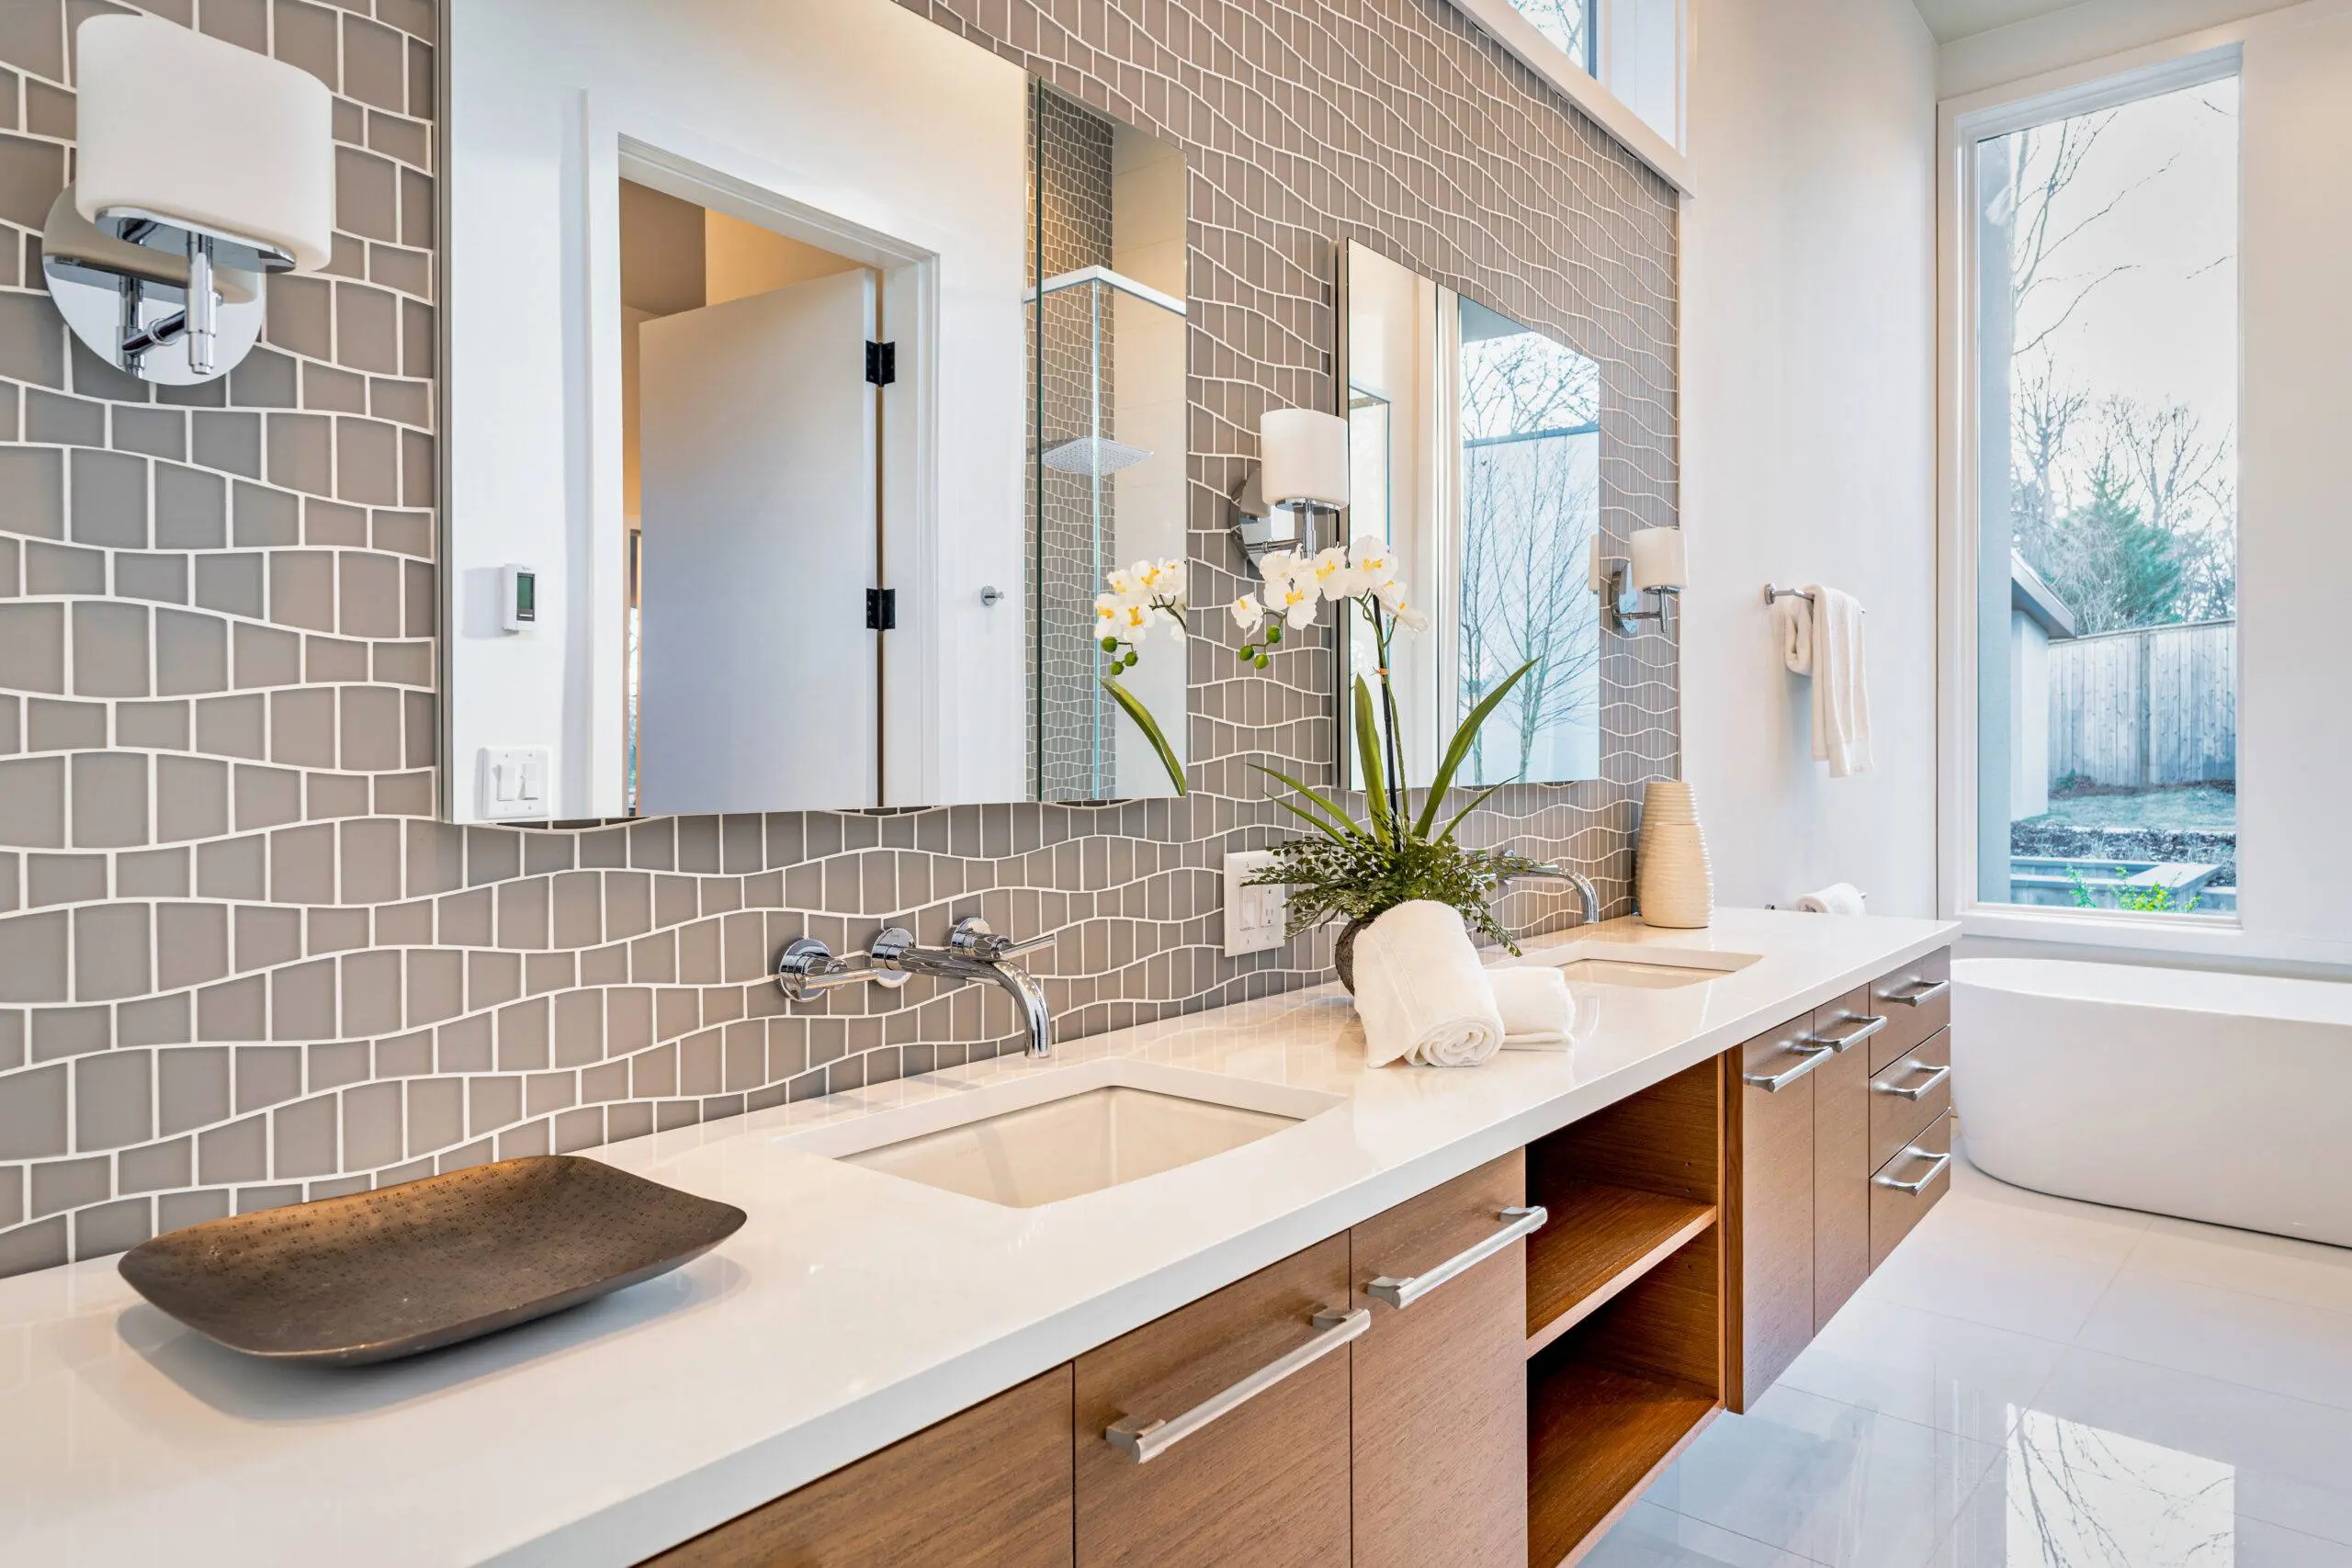 double sink bathroom with glass backsplash and two mirrors. This has a clean and simple look.